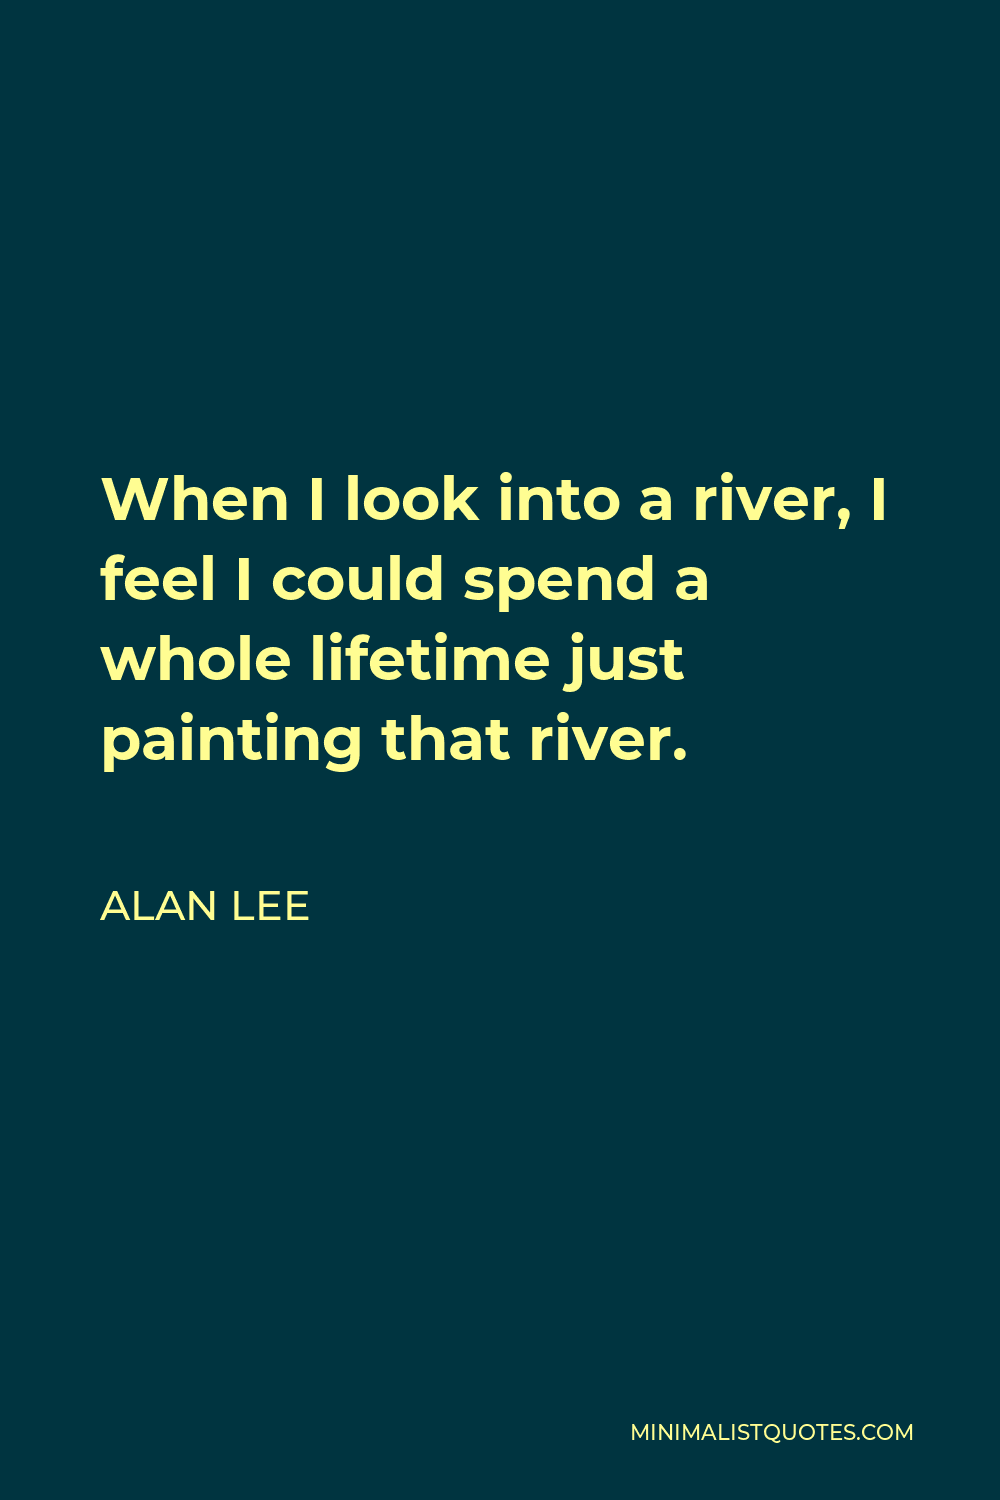 Alan Lee Quote - When I look into a river, I feel I could spend a whole lifetime just painting that river.